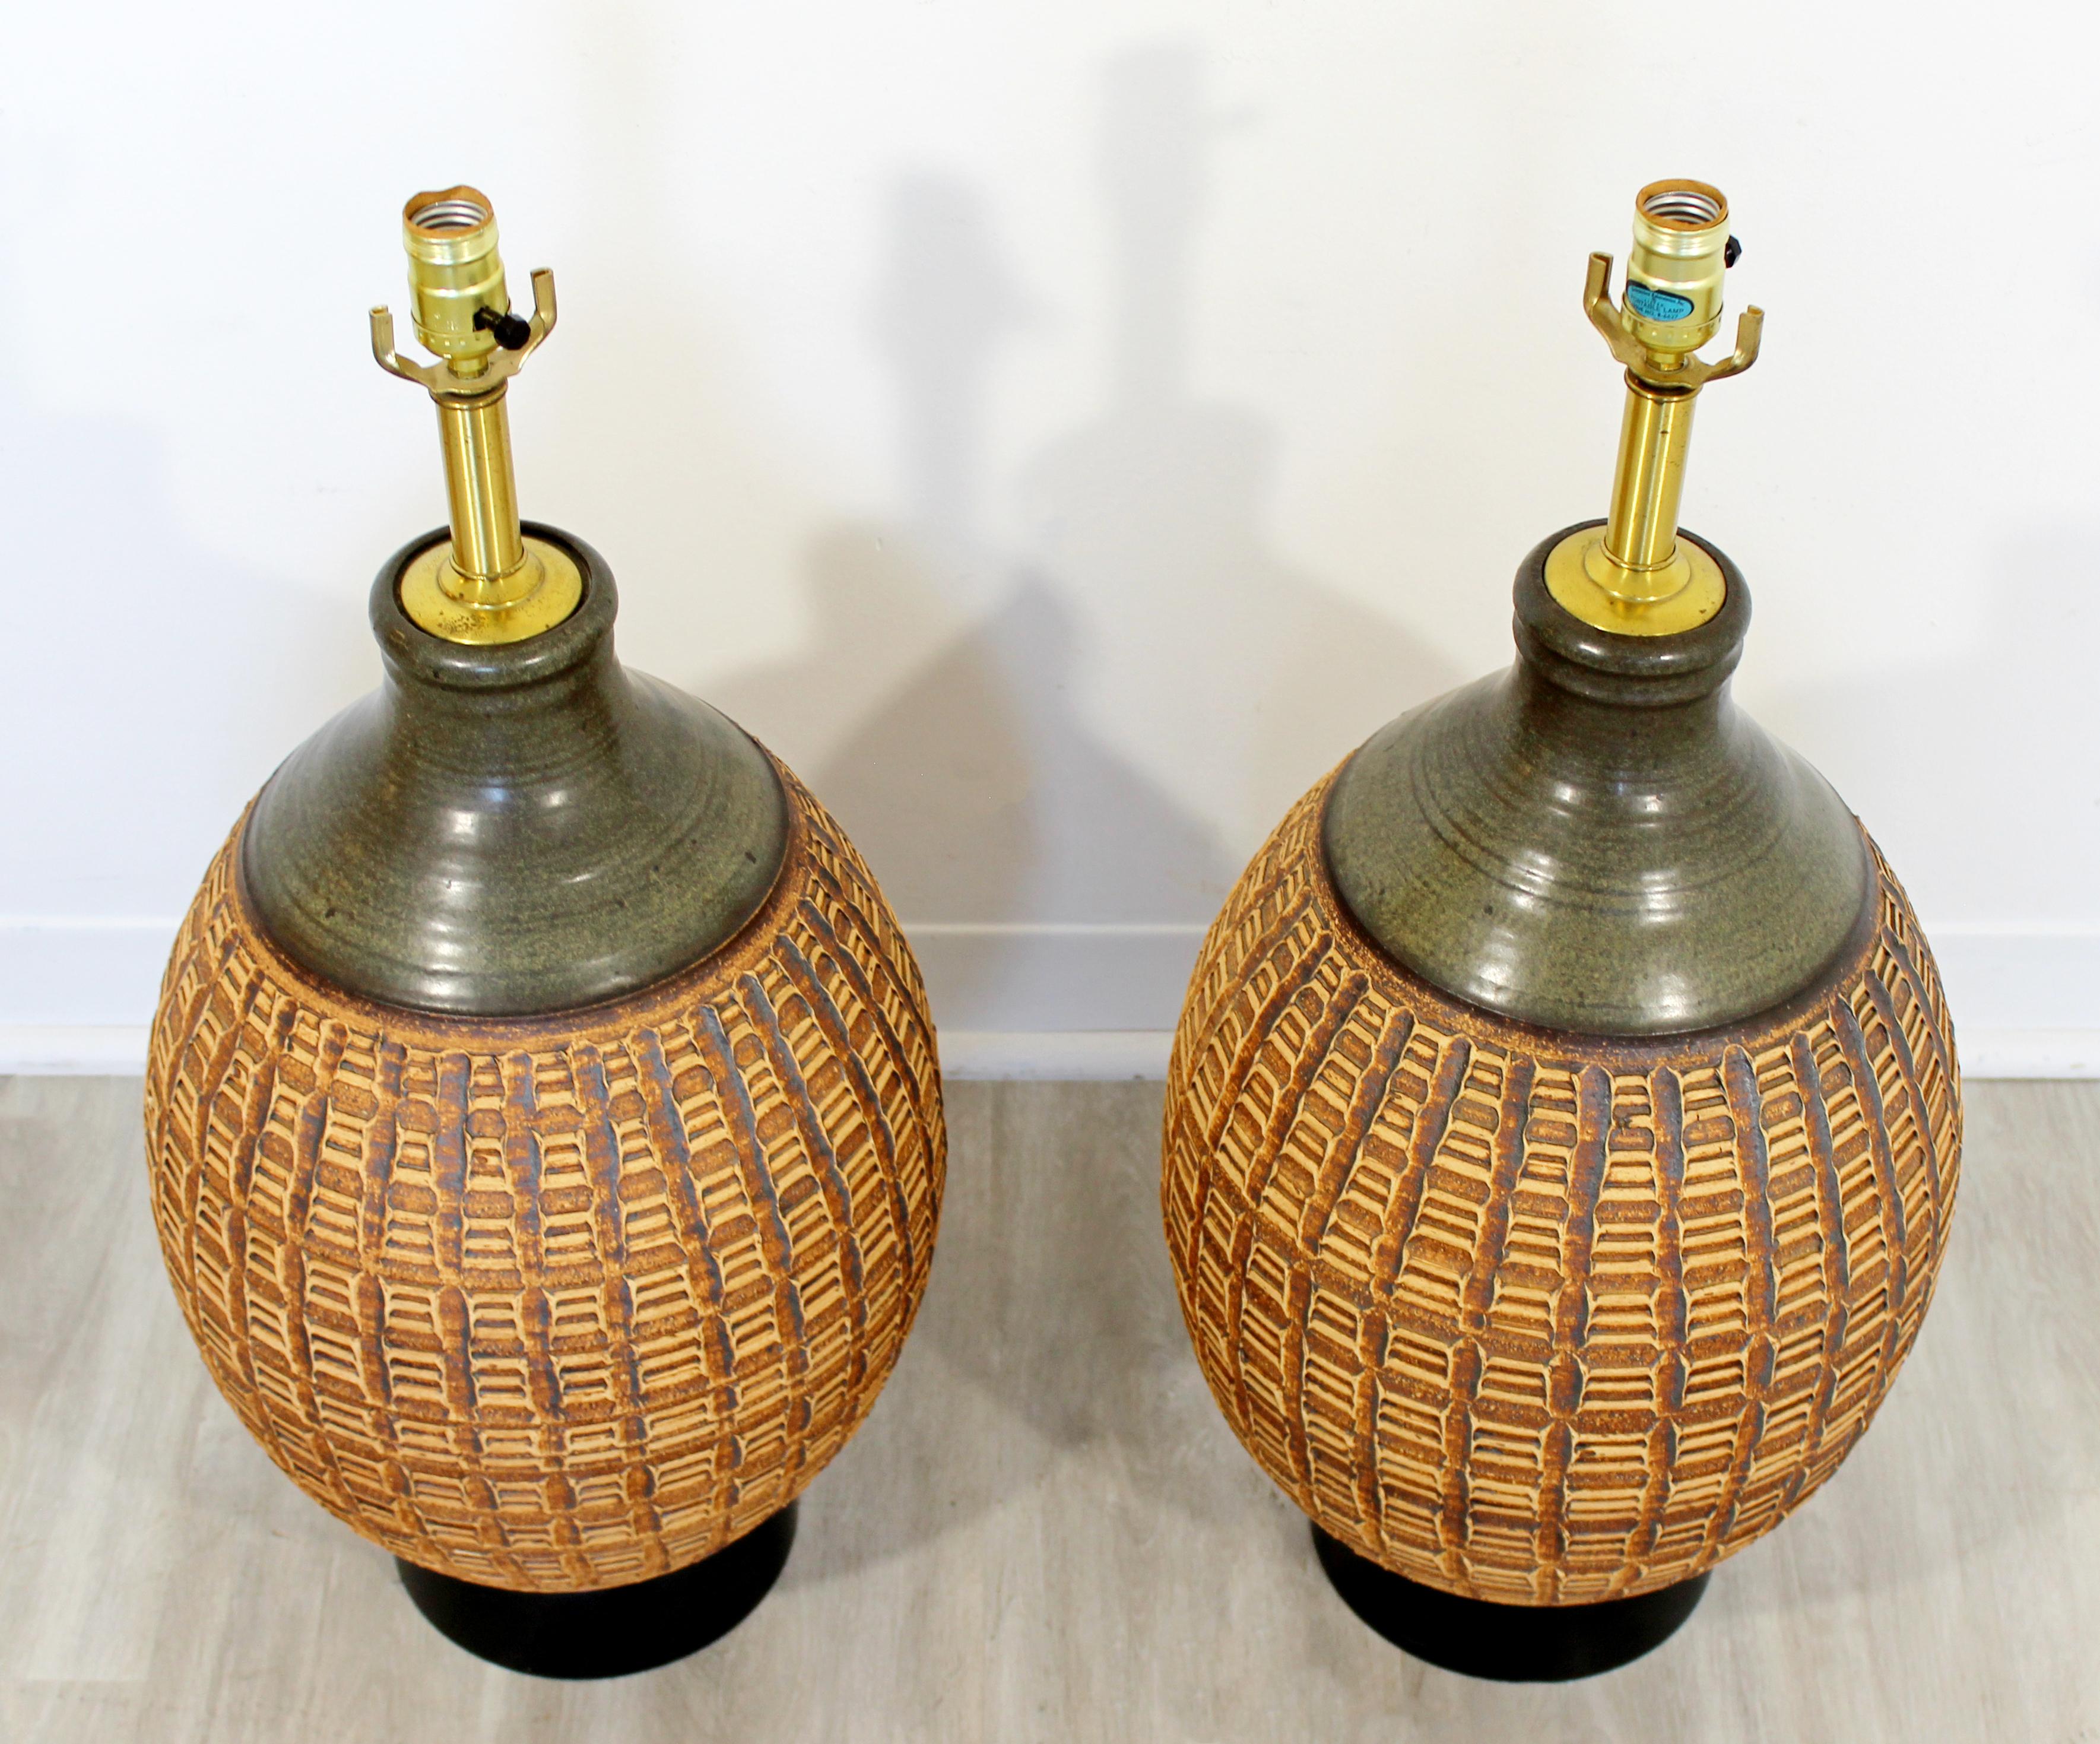 For your consideration is a gorgeous pair of large, ceramic table lamps, by Bob Kinzie for the Affiliated Craftsmen Lamp Company of Costa Mesa, CA, circa 1970s. In excellent vintage condition. The dimensions of each are 10